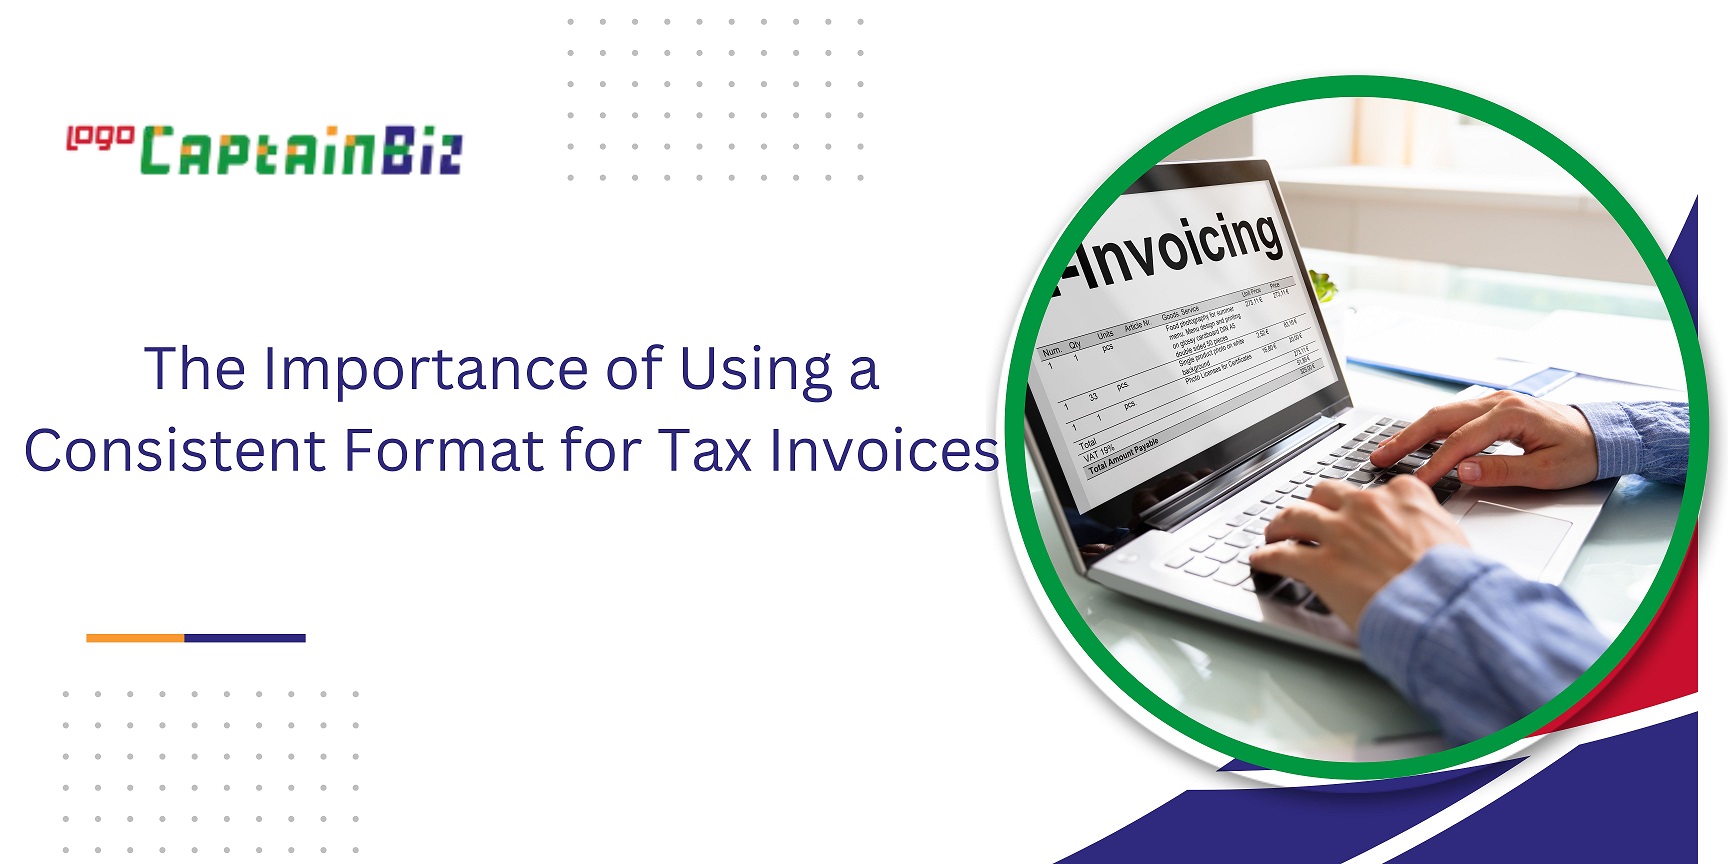 CaptainBiz: The Importance of Using a Consistent Format for Tax Invoices